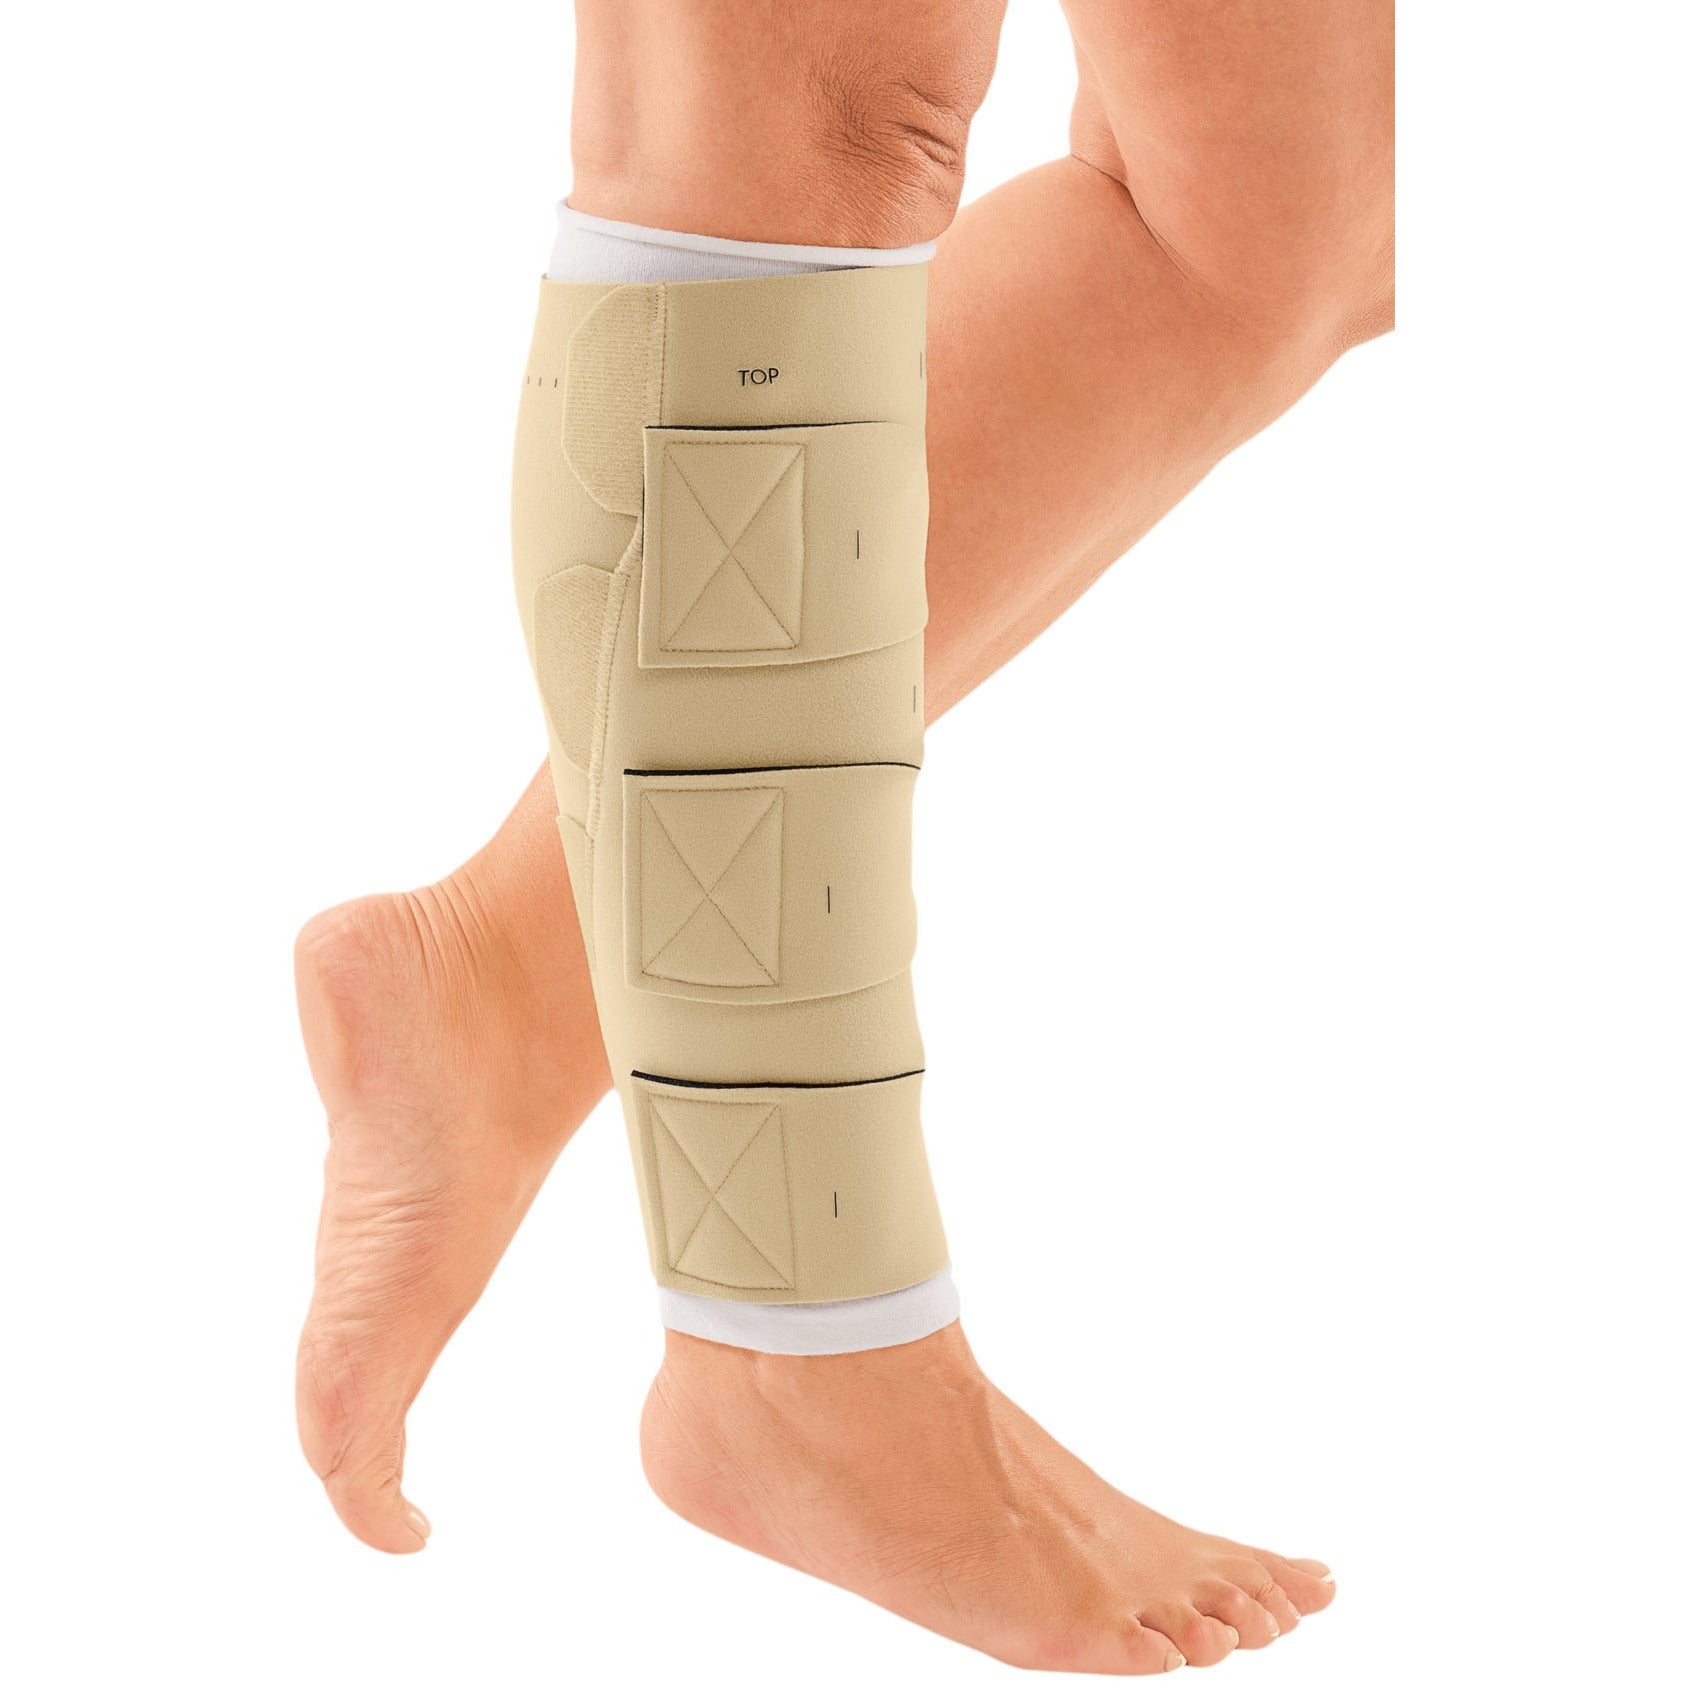 5 Reasons to Wear Compression Wraps for Legs by lymphedemaproducts